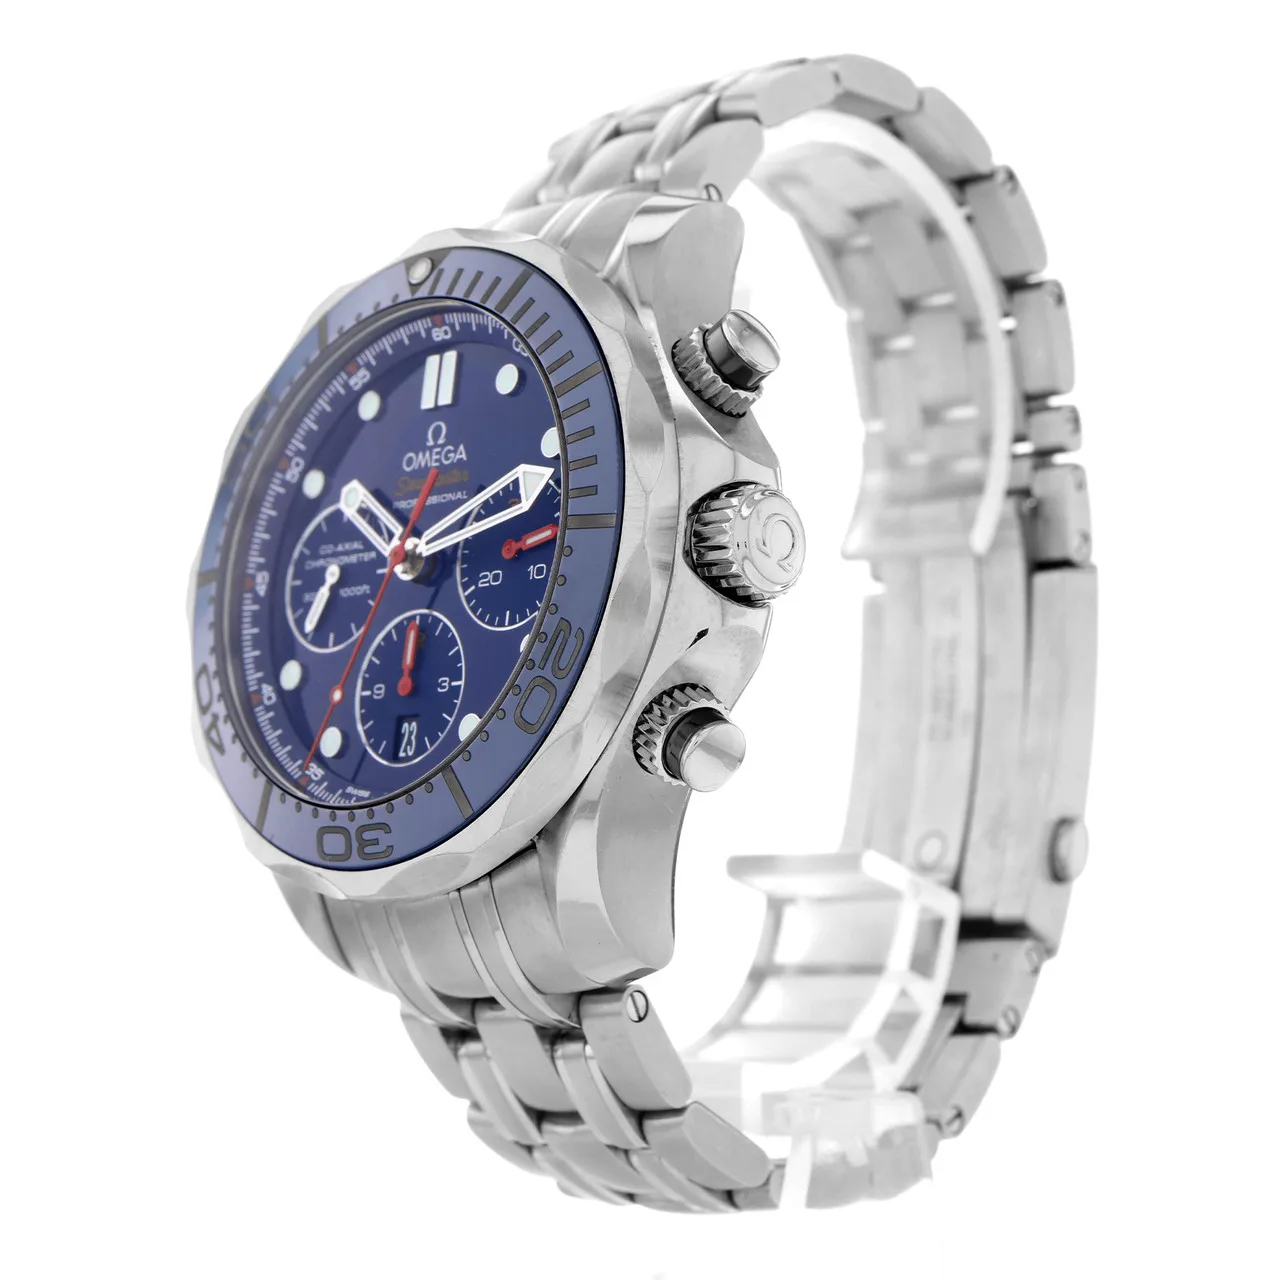 2017 Omega Seamaster Diver 300M Co-Axial 44 Chronograph Stainless Steel / Blue / Bracelet 212.30.44.50.03.001 Listing Image 2